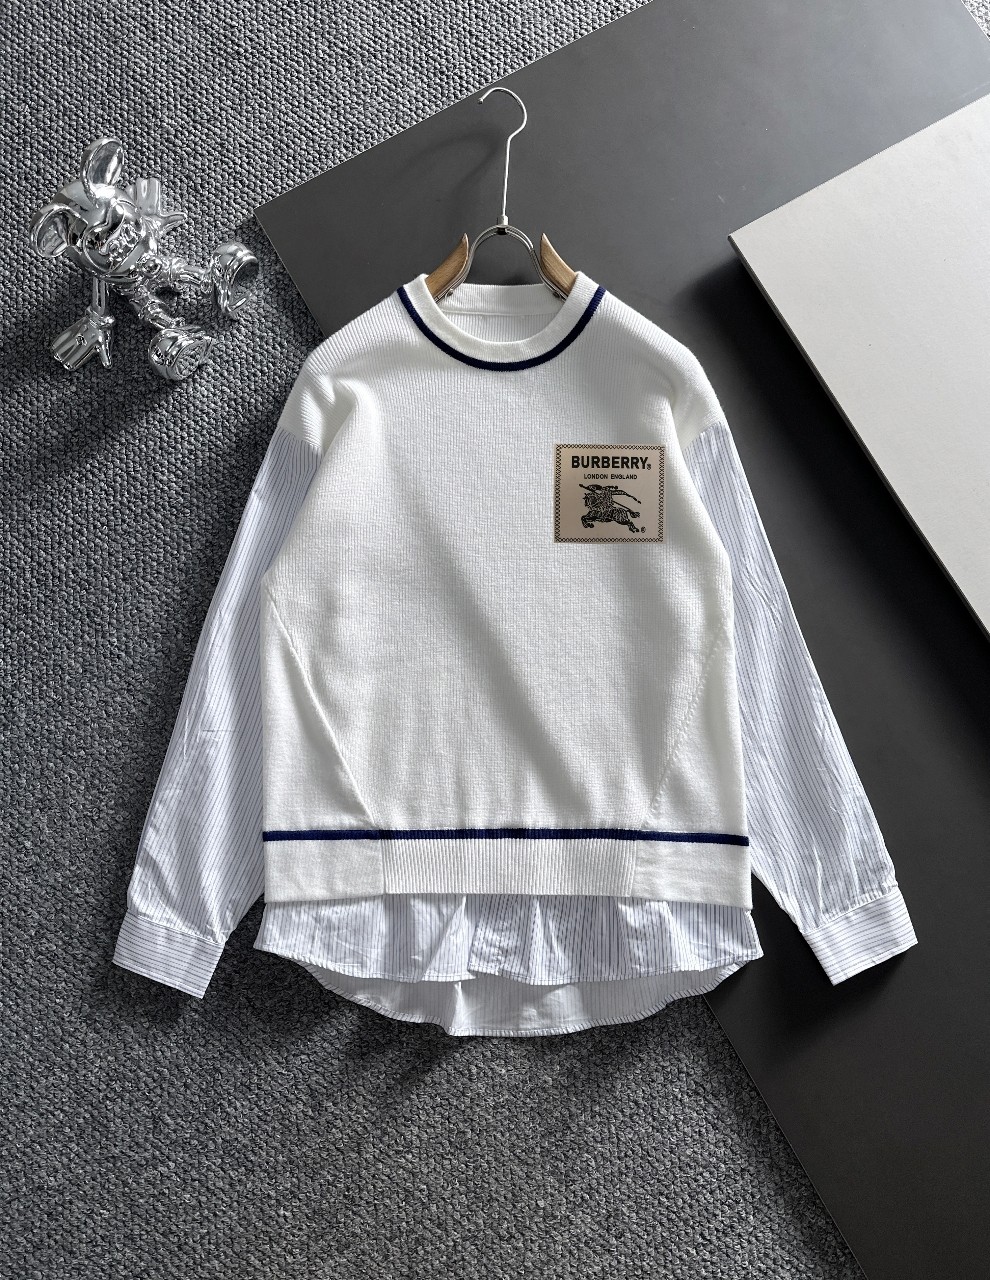 Burberry Clothing Sweatshirts Embroidery Wool Winter Collection Fashion